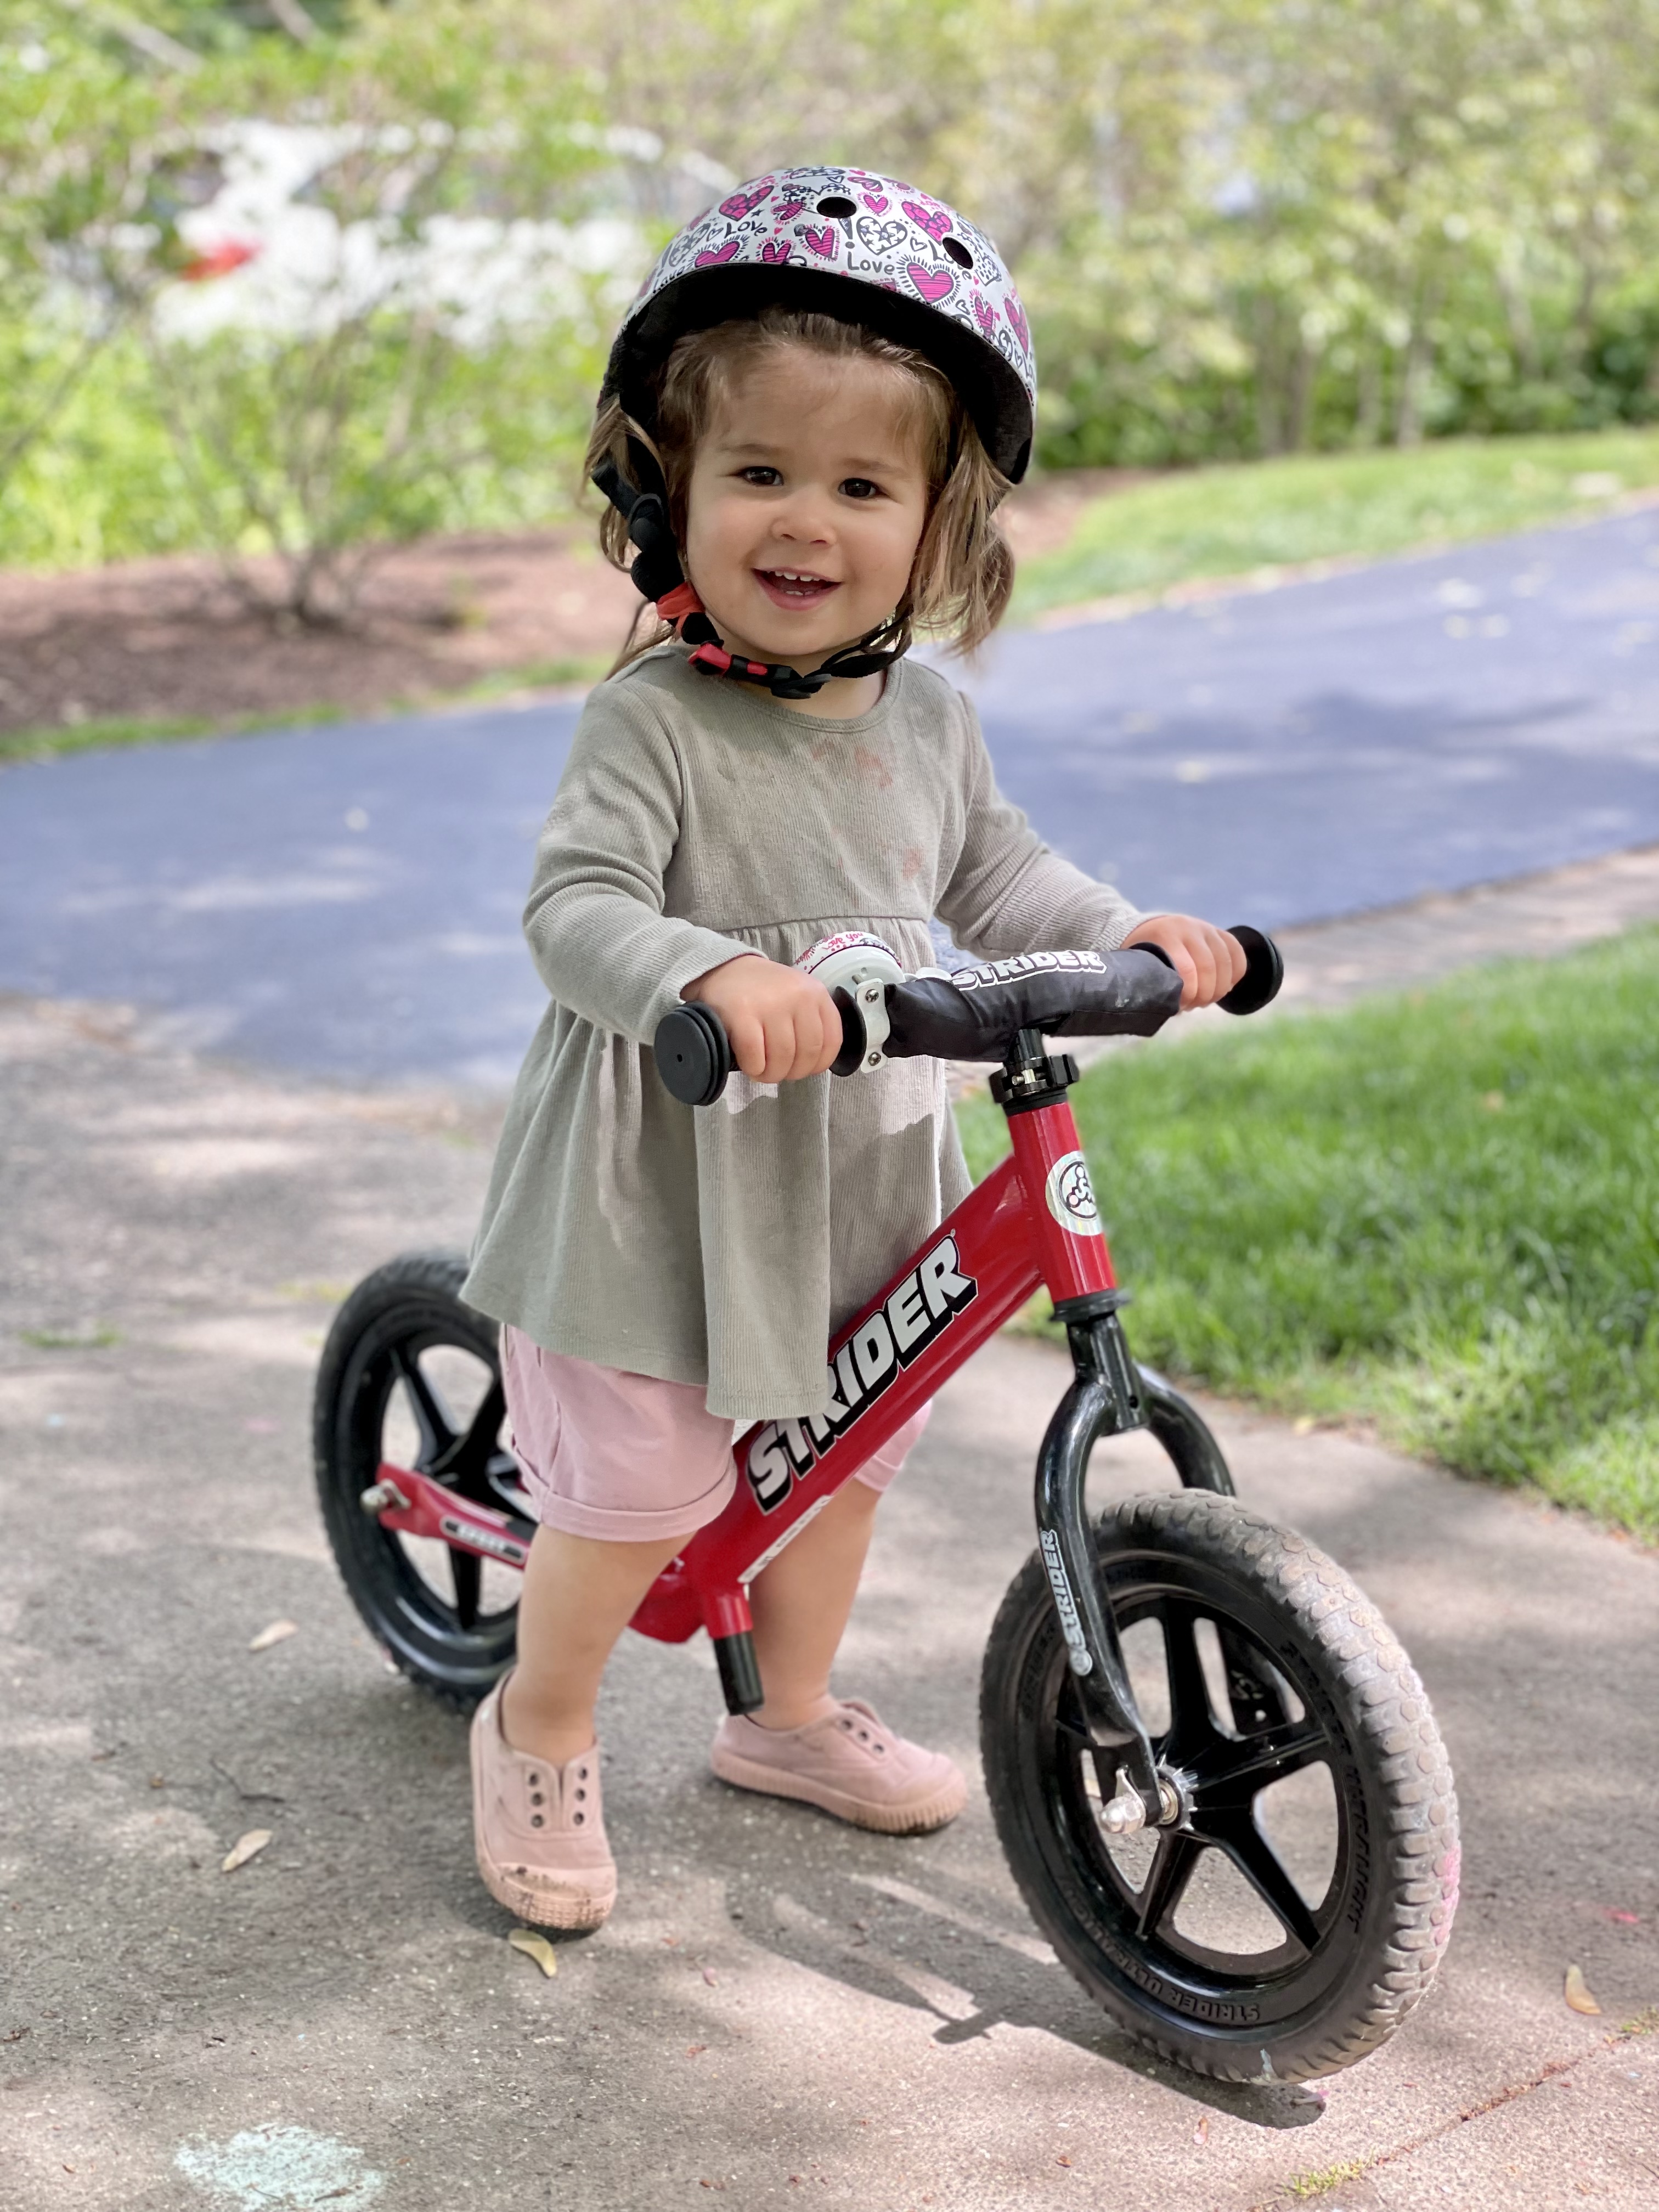 Strider - 12 Sport Balance Bike, Ages 18 Months to 5 Years - Red - image 3 of 13